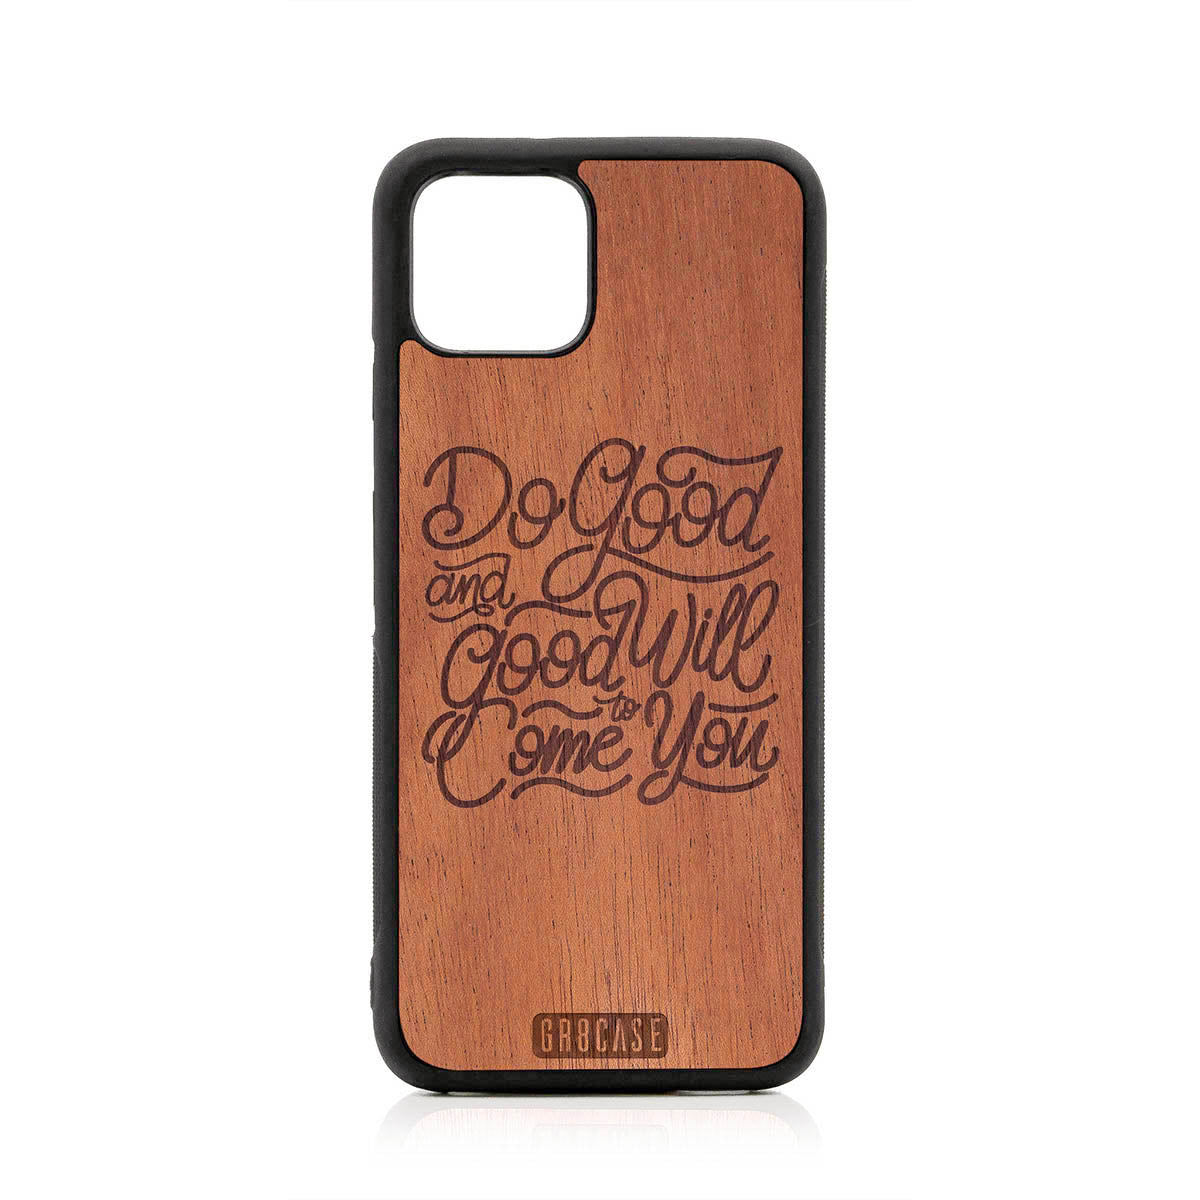 Do Good And Good Will Come To You Design Wood Case For Google Pixel 4 by GR8CASE